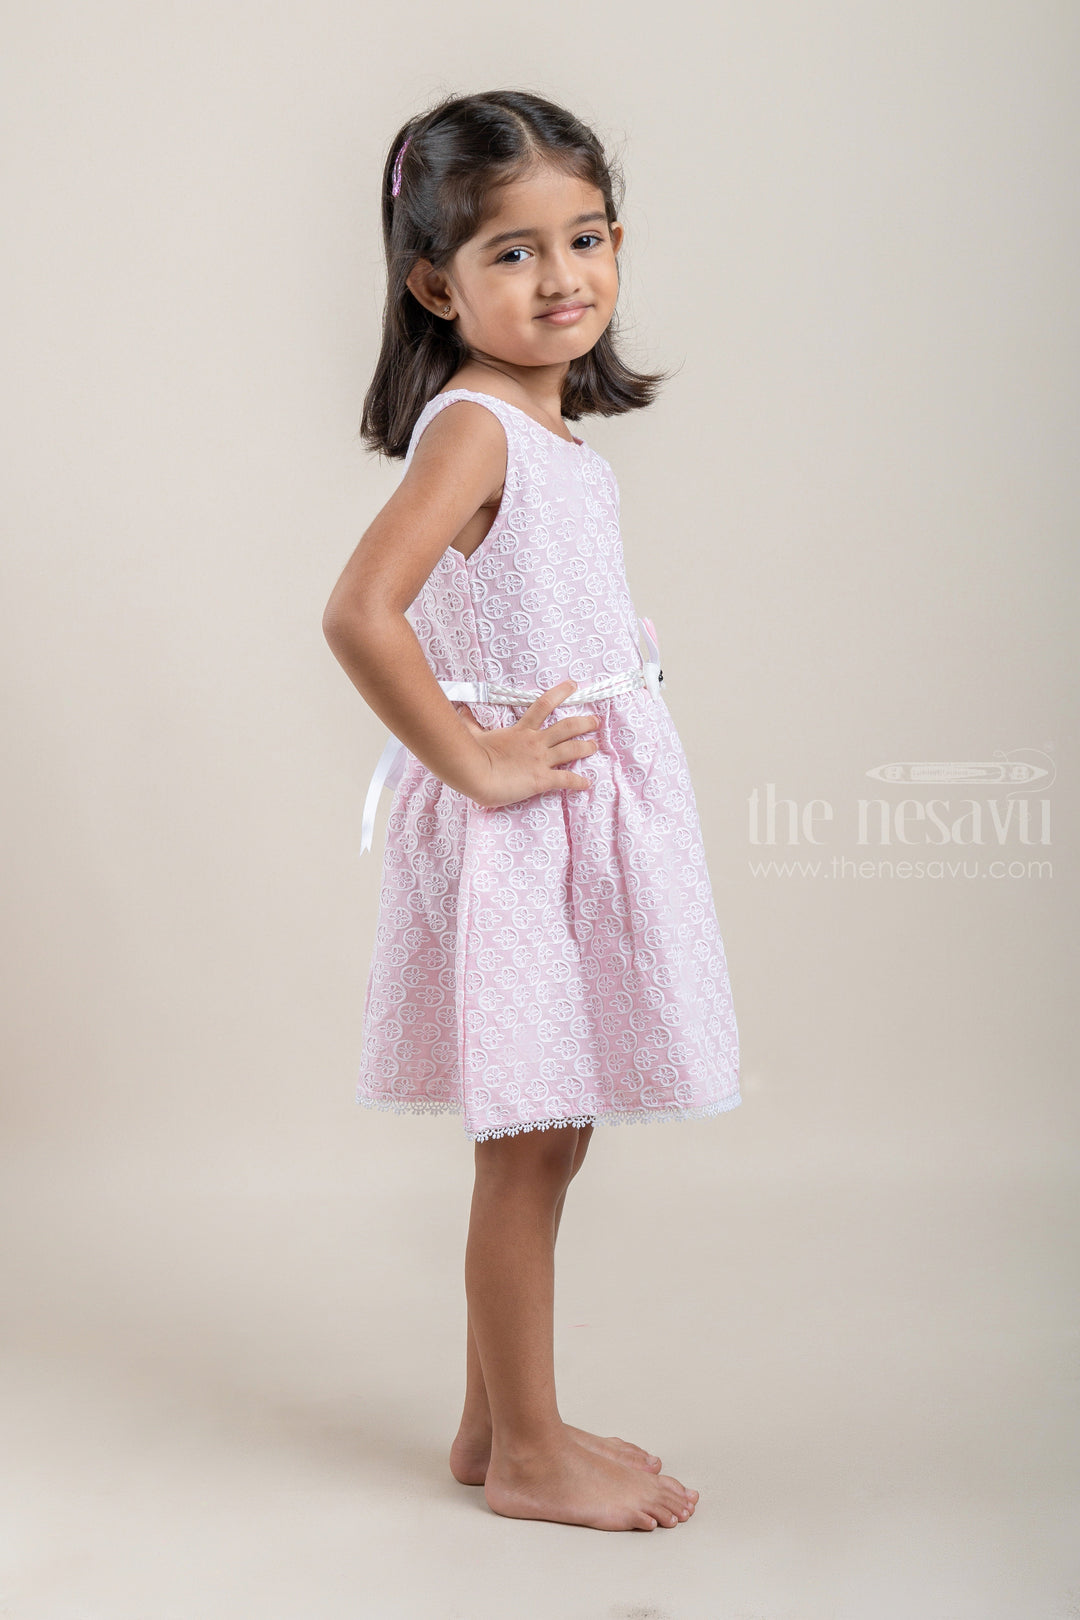 The Nesavu Baby Cotton Frocks All Over Floral Embroidered Pink Bamboo Cotton Frock For Baby Girls Nesavu All Over Floral Embroidered Pink Bamboo Cotton Baby Frock | The Nesavu